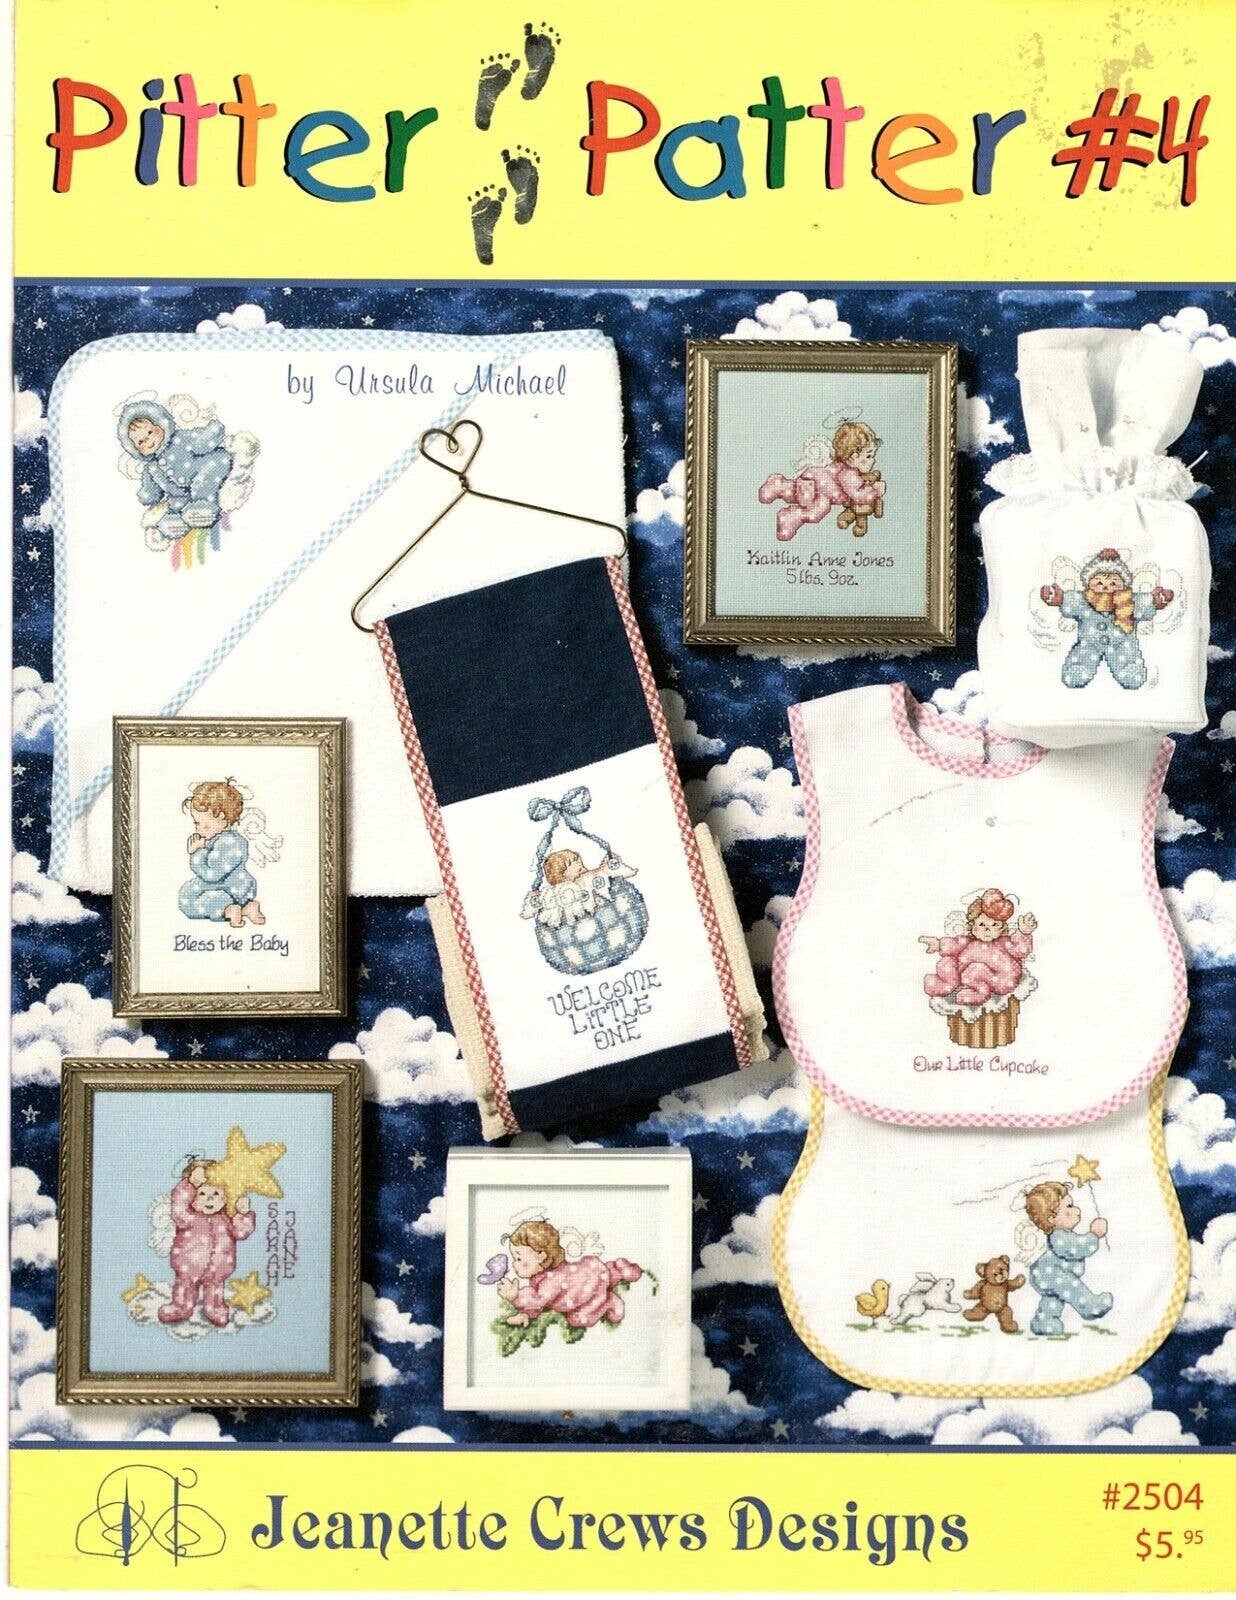 Jeanette Crews "Pitter Patter #4" Counted Cross Stitch Pattern 2001 9 Designs - $10.31